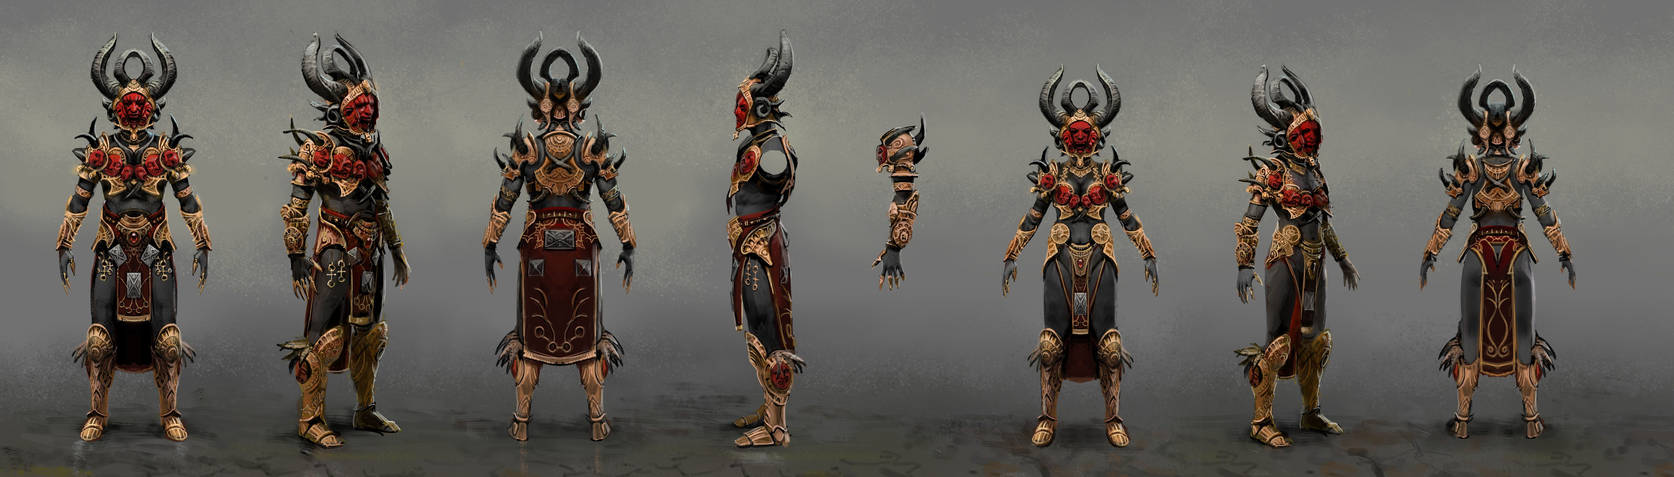 Vaal Orb Armour concept art for Path of Exile